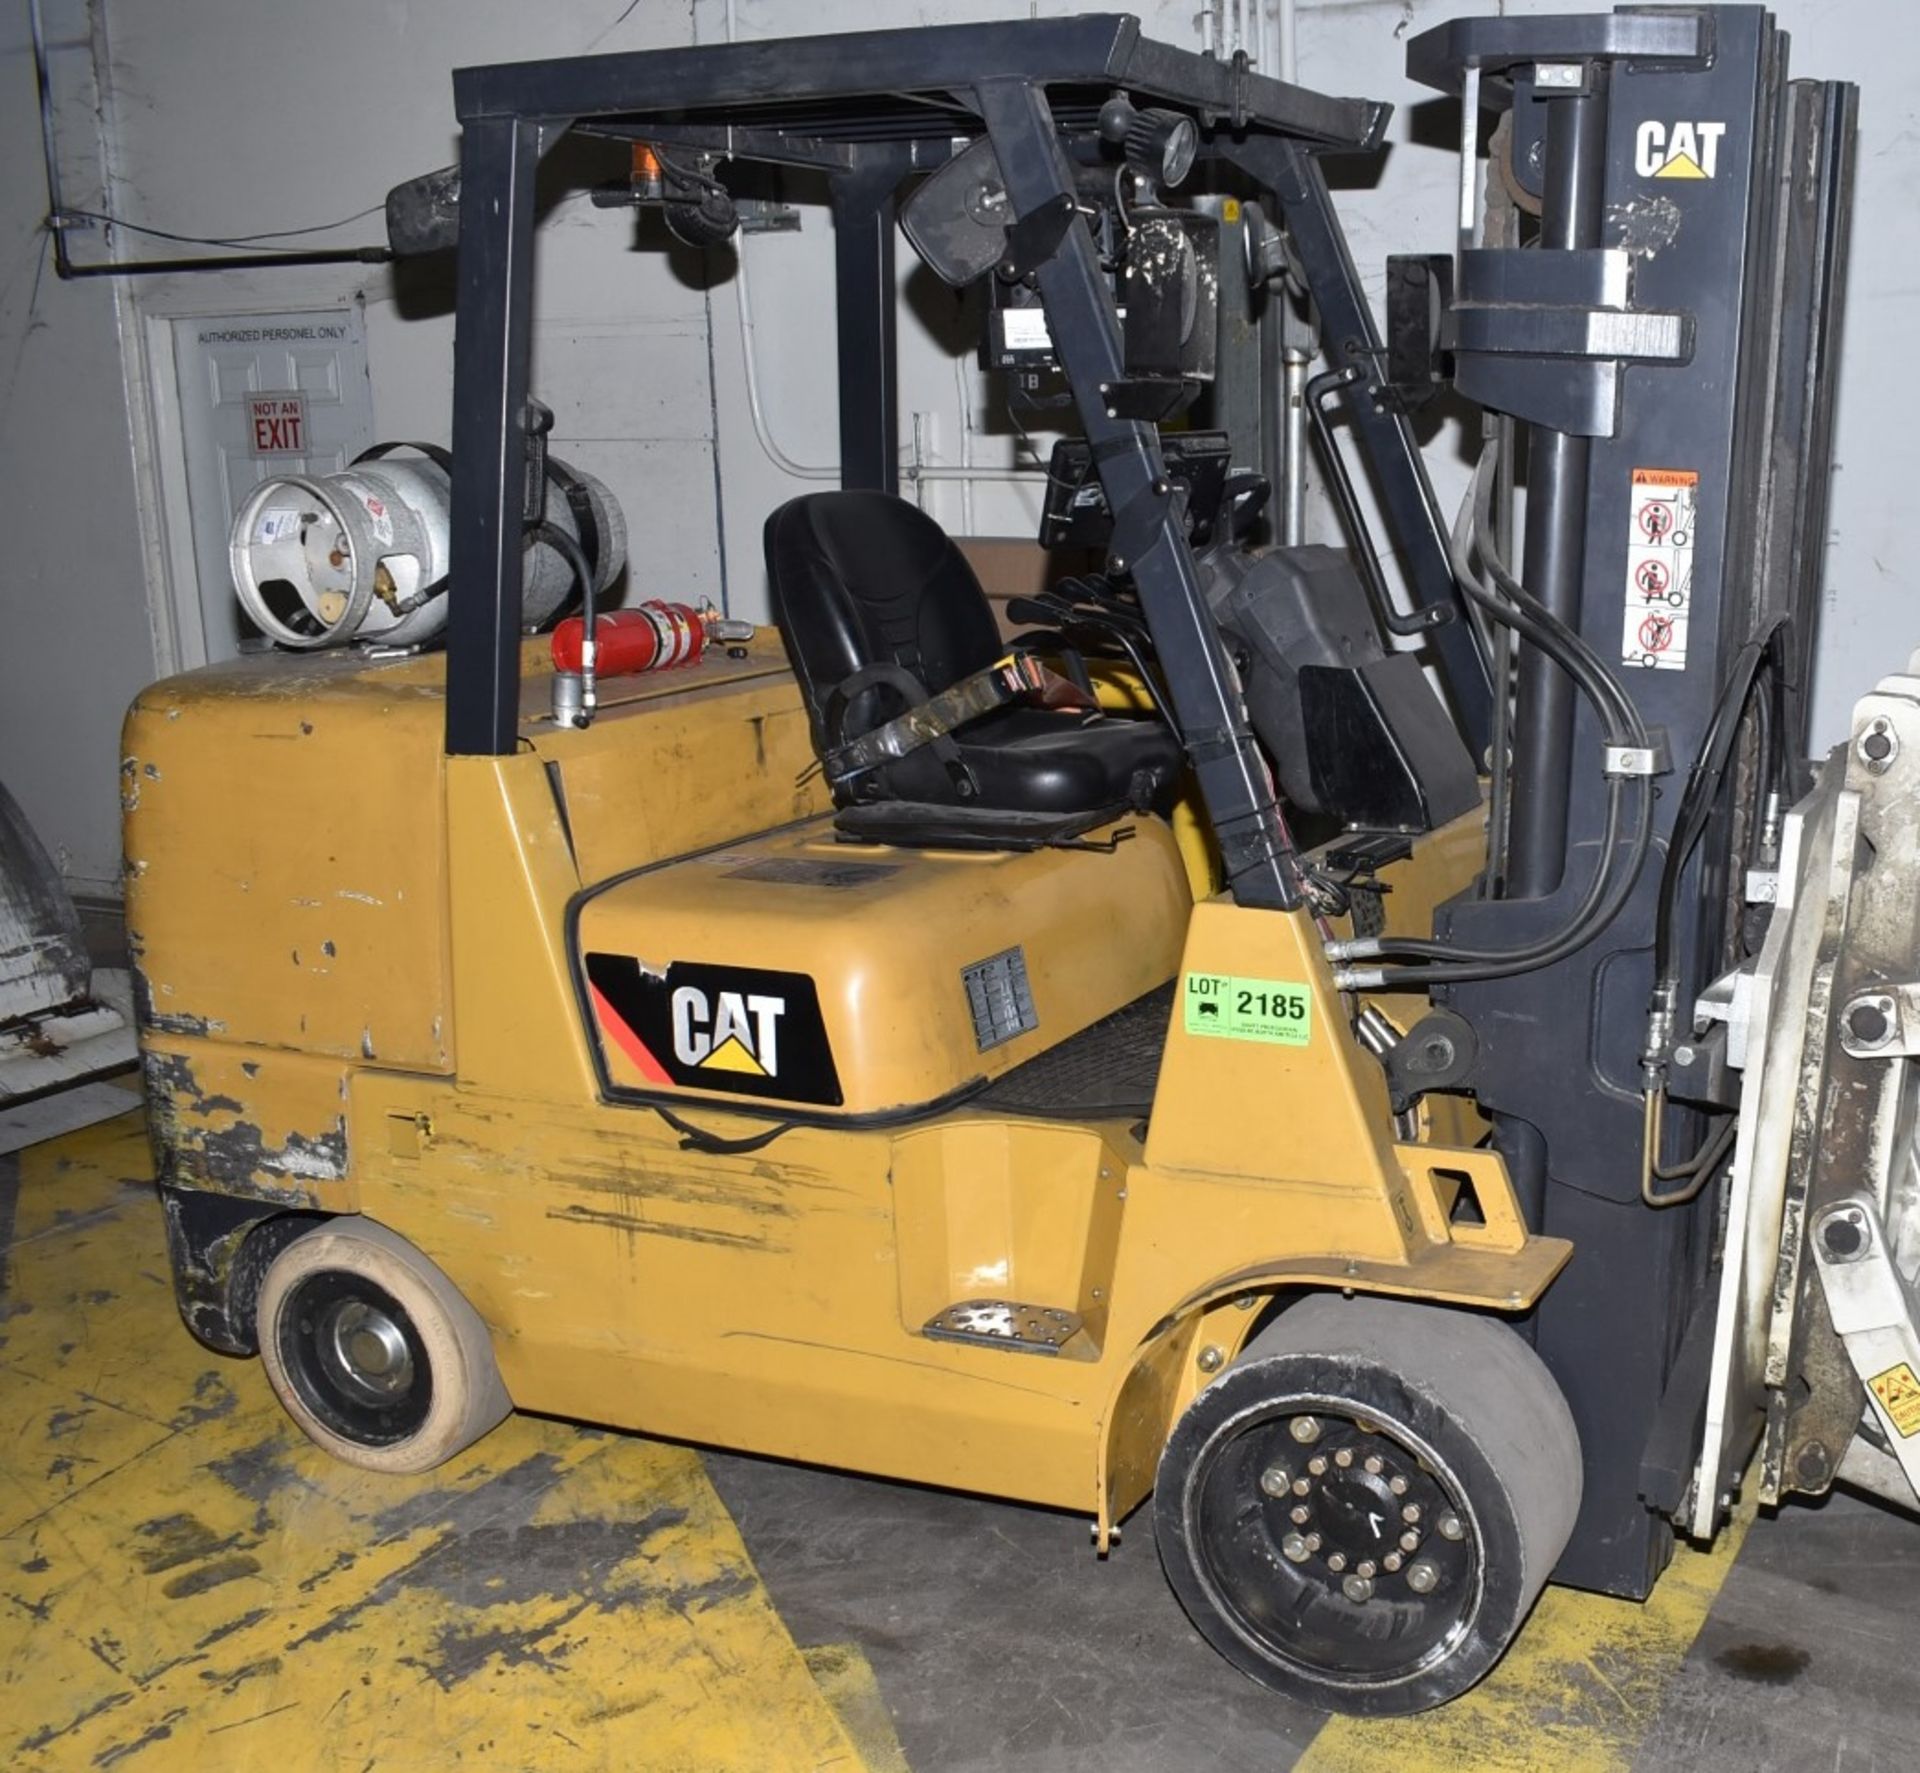 CATERPILLAR (2016) GC55K 7,200 LBS. CAPACITY LPG FORKLIFT WITH 172" MAX VERTICAL REACH, 3-STAGE HIGH